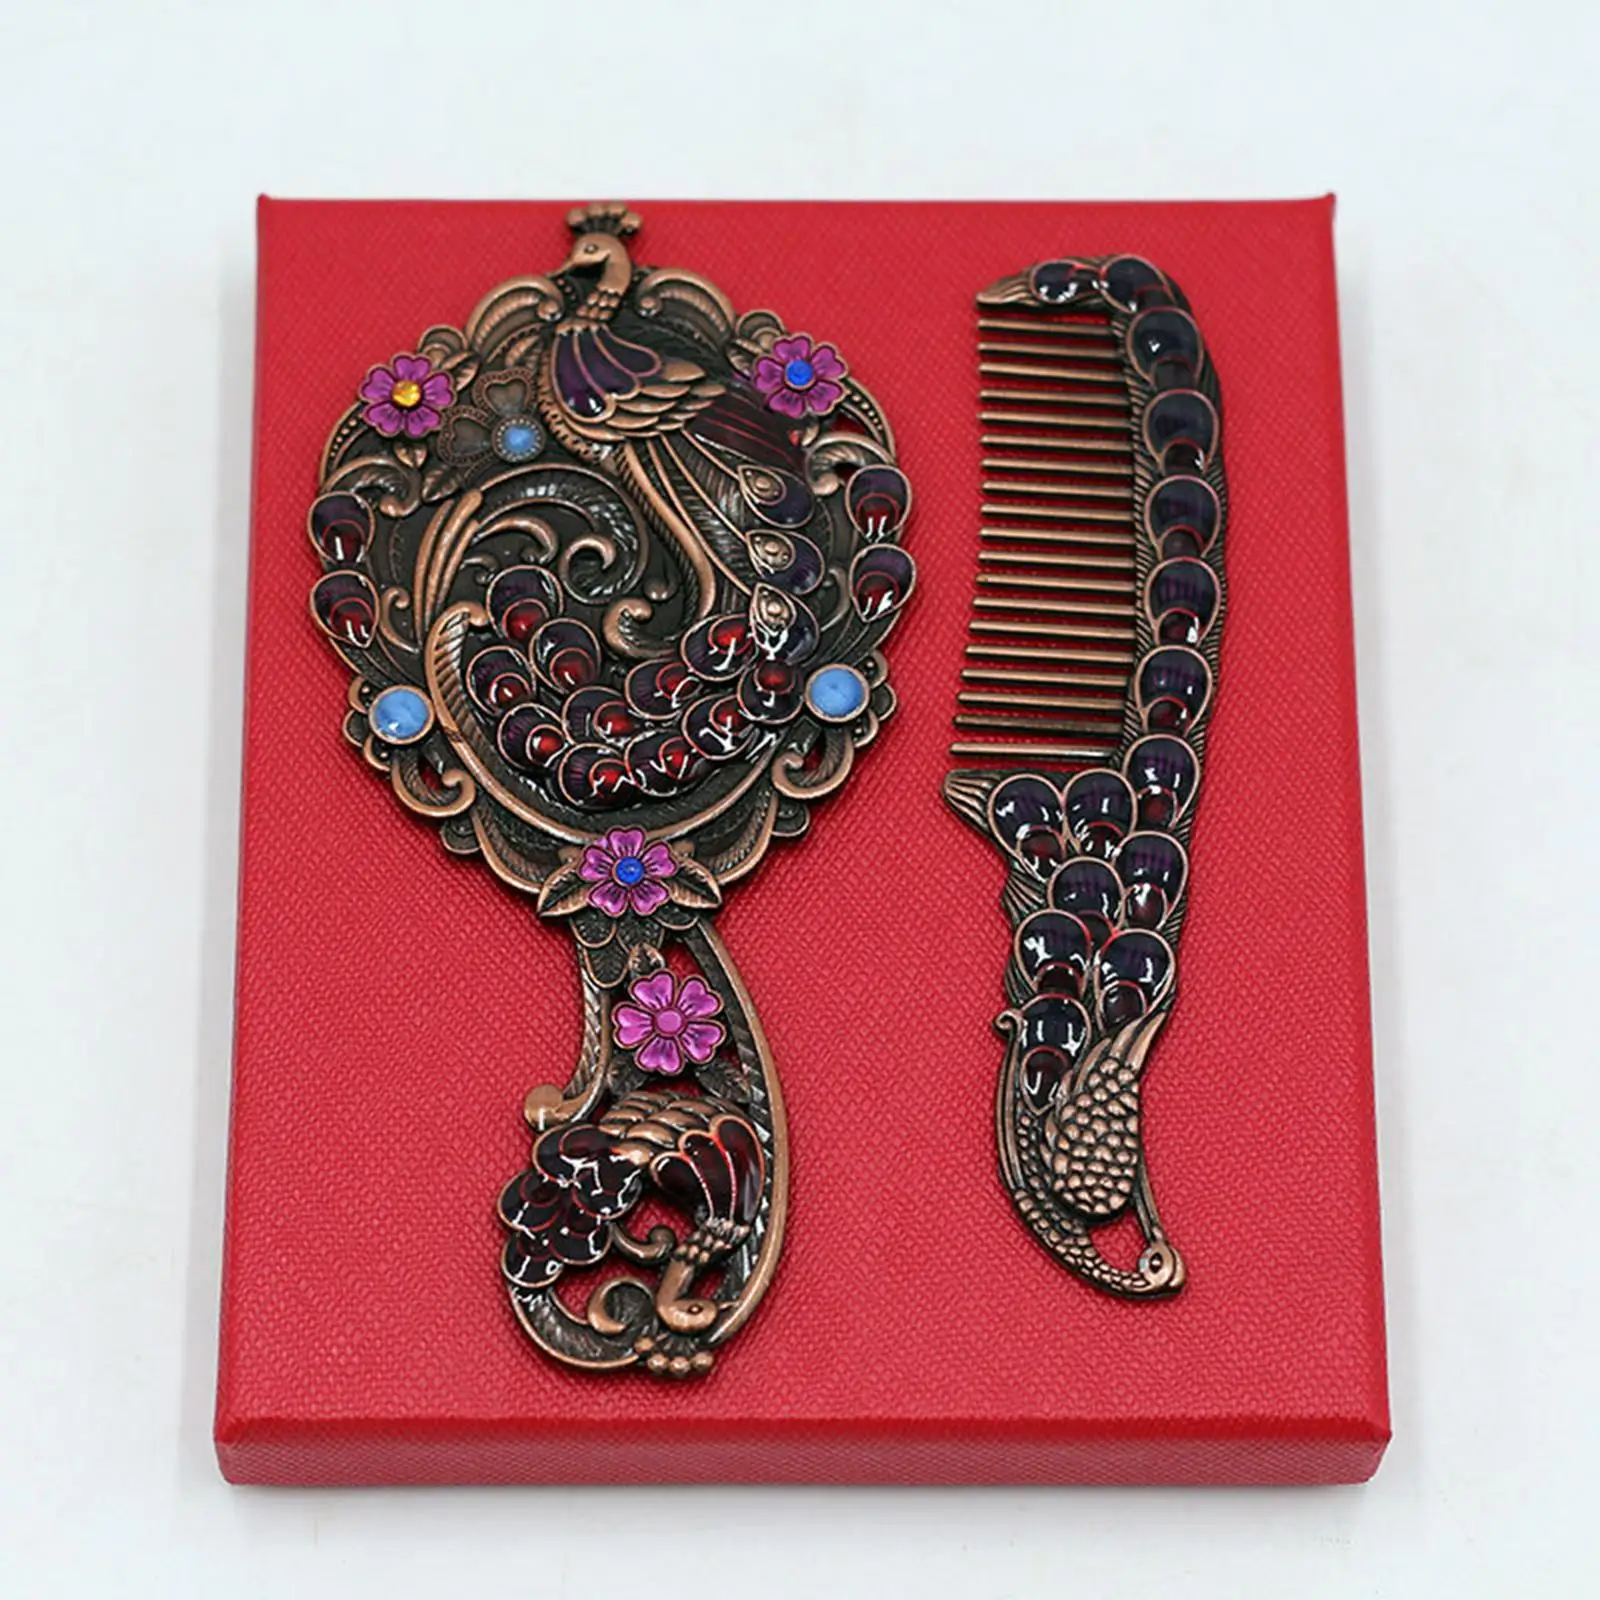 Retro Embossing Oval Make  Hand Held Comb Set Russian Style